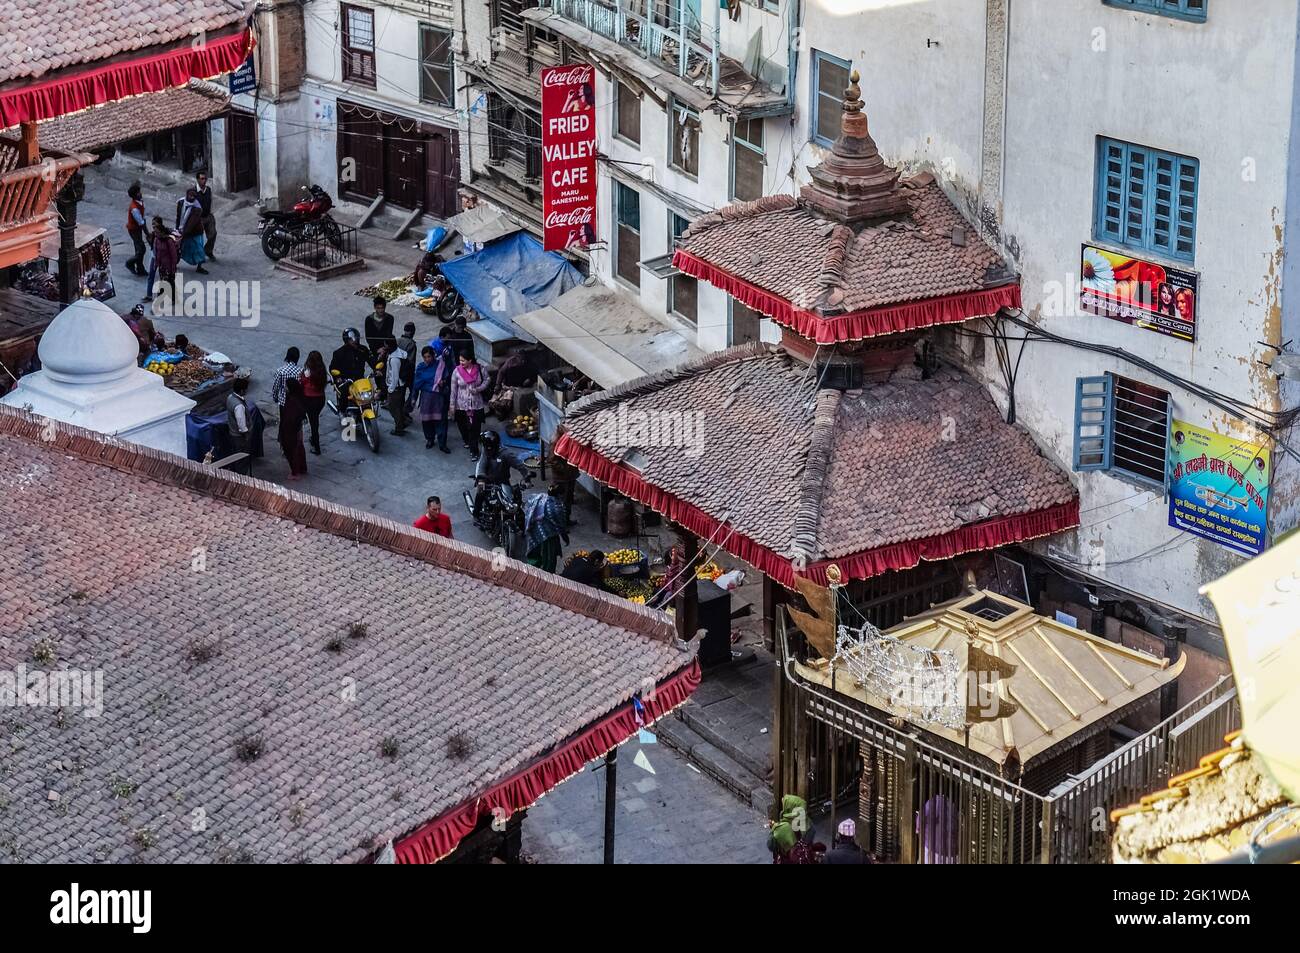 Durga temple, two-storey hindu shrine attached to a building in Maru Square, next to Kathmandu Darbar square, before the 2015 Gorkha earthquake Stock Photo